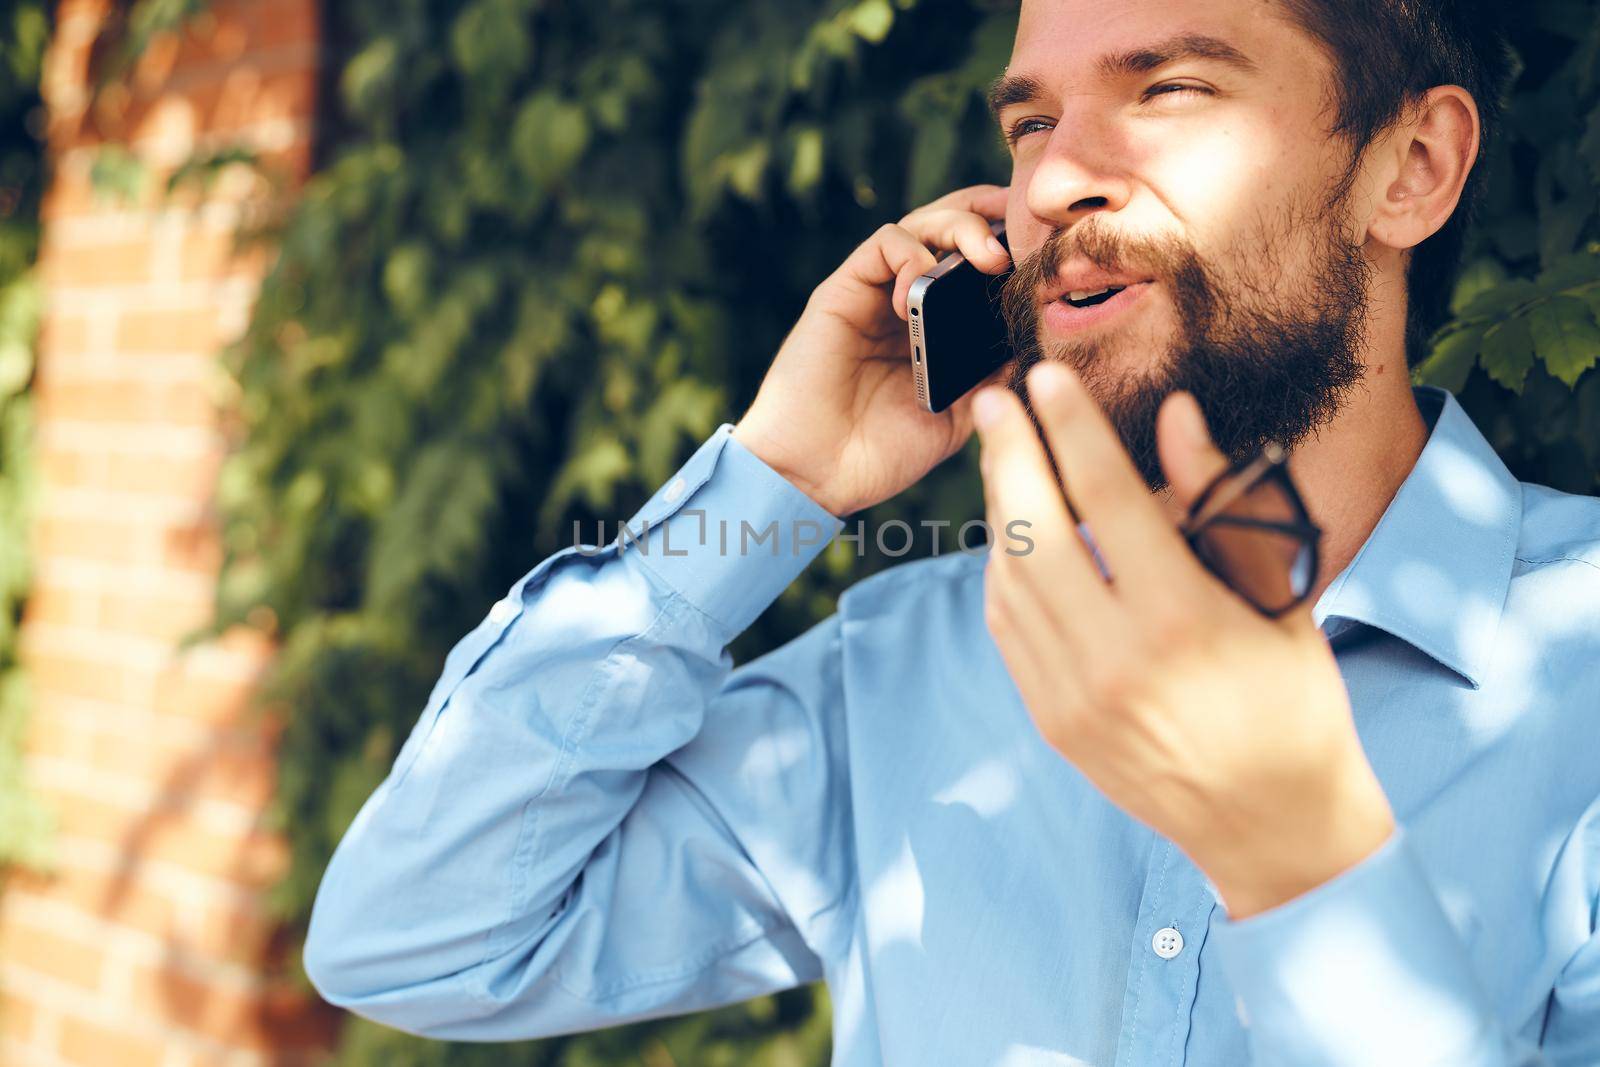 business man with phone outdoors communication lifestyle. High quality photo